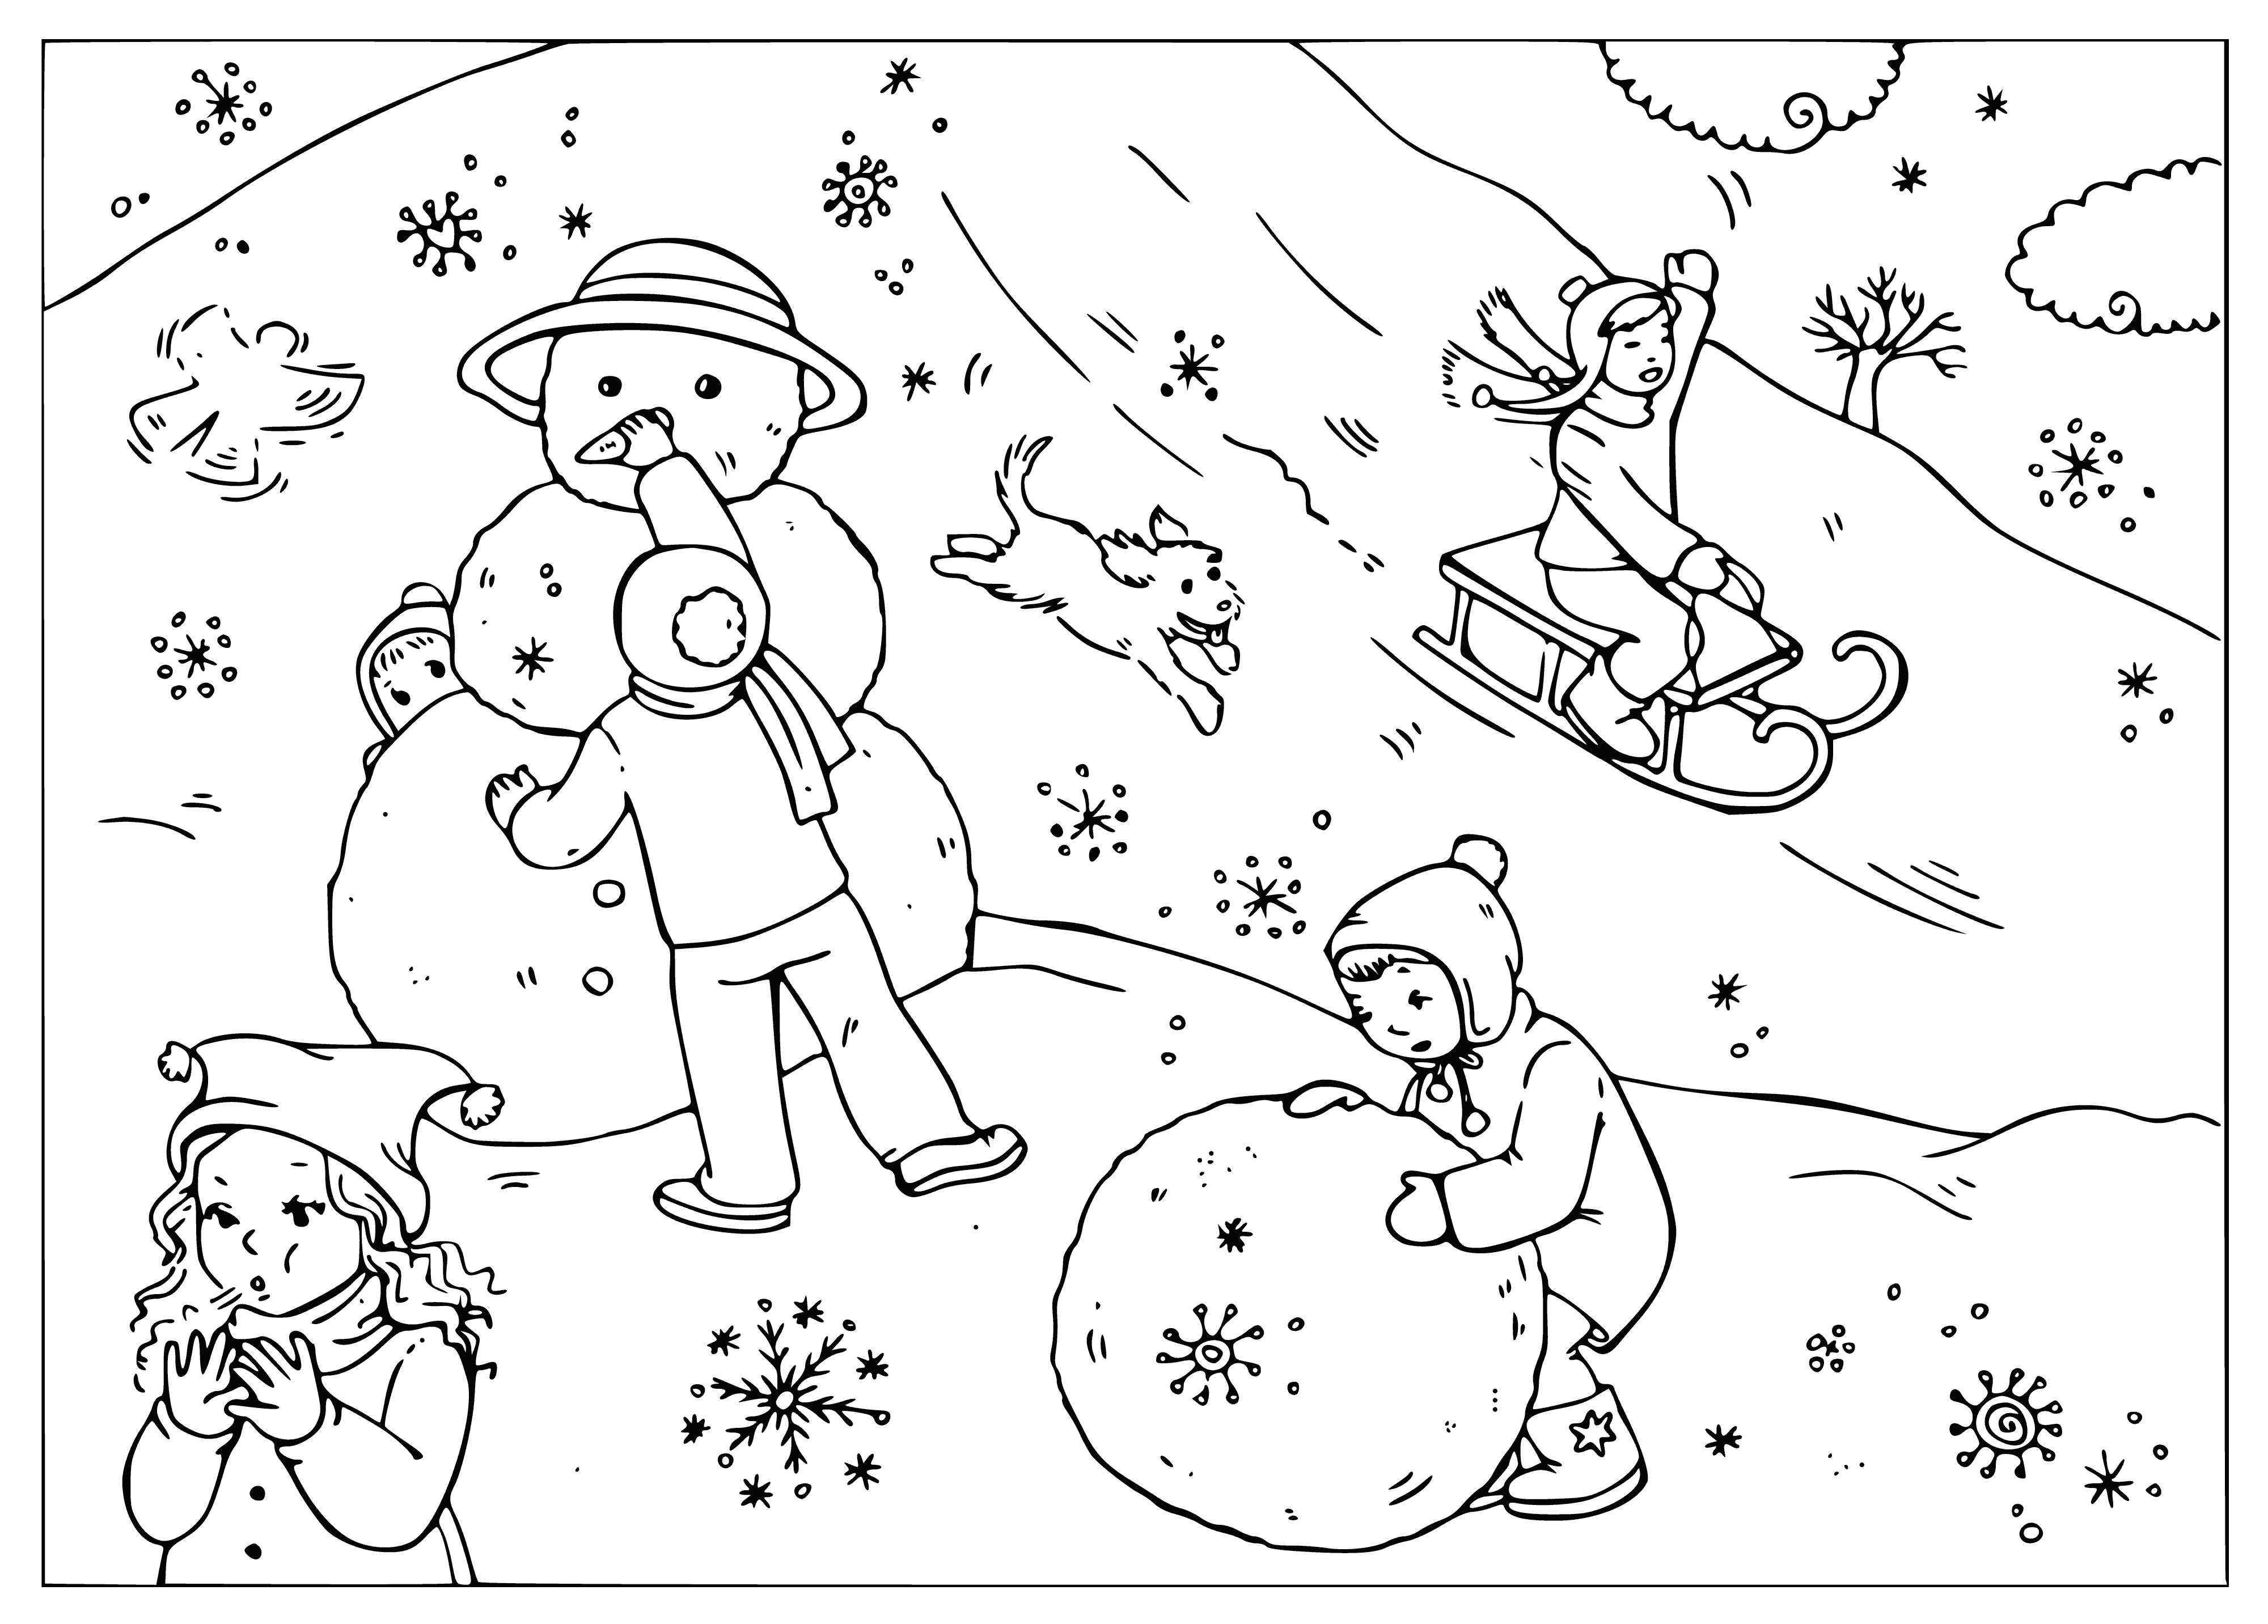 coloring page: -> Kids playing in the snow--building a snowman & having a snowball fight!